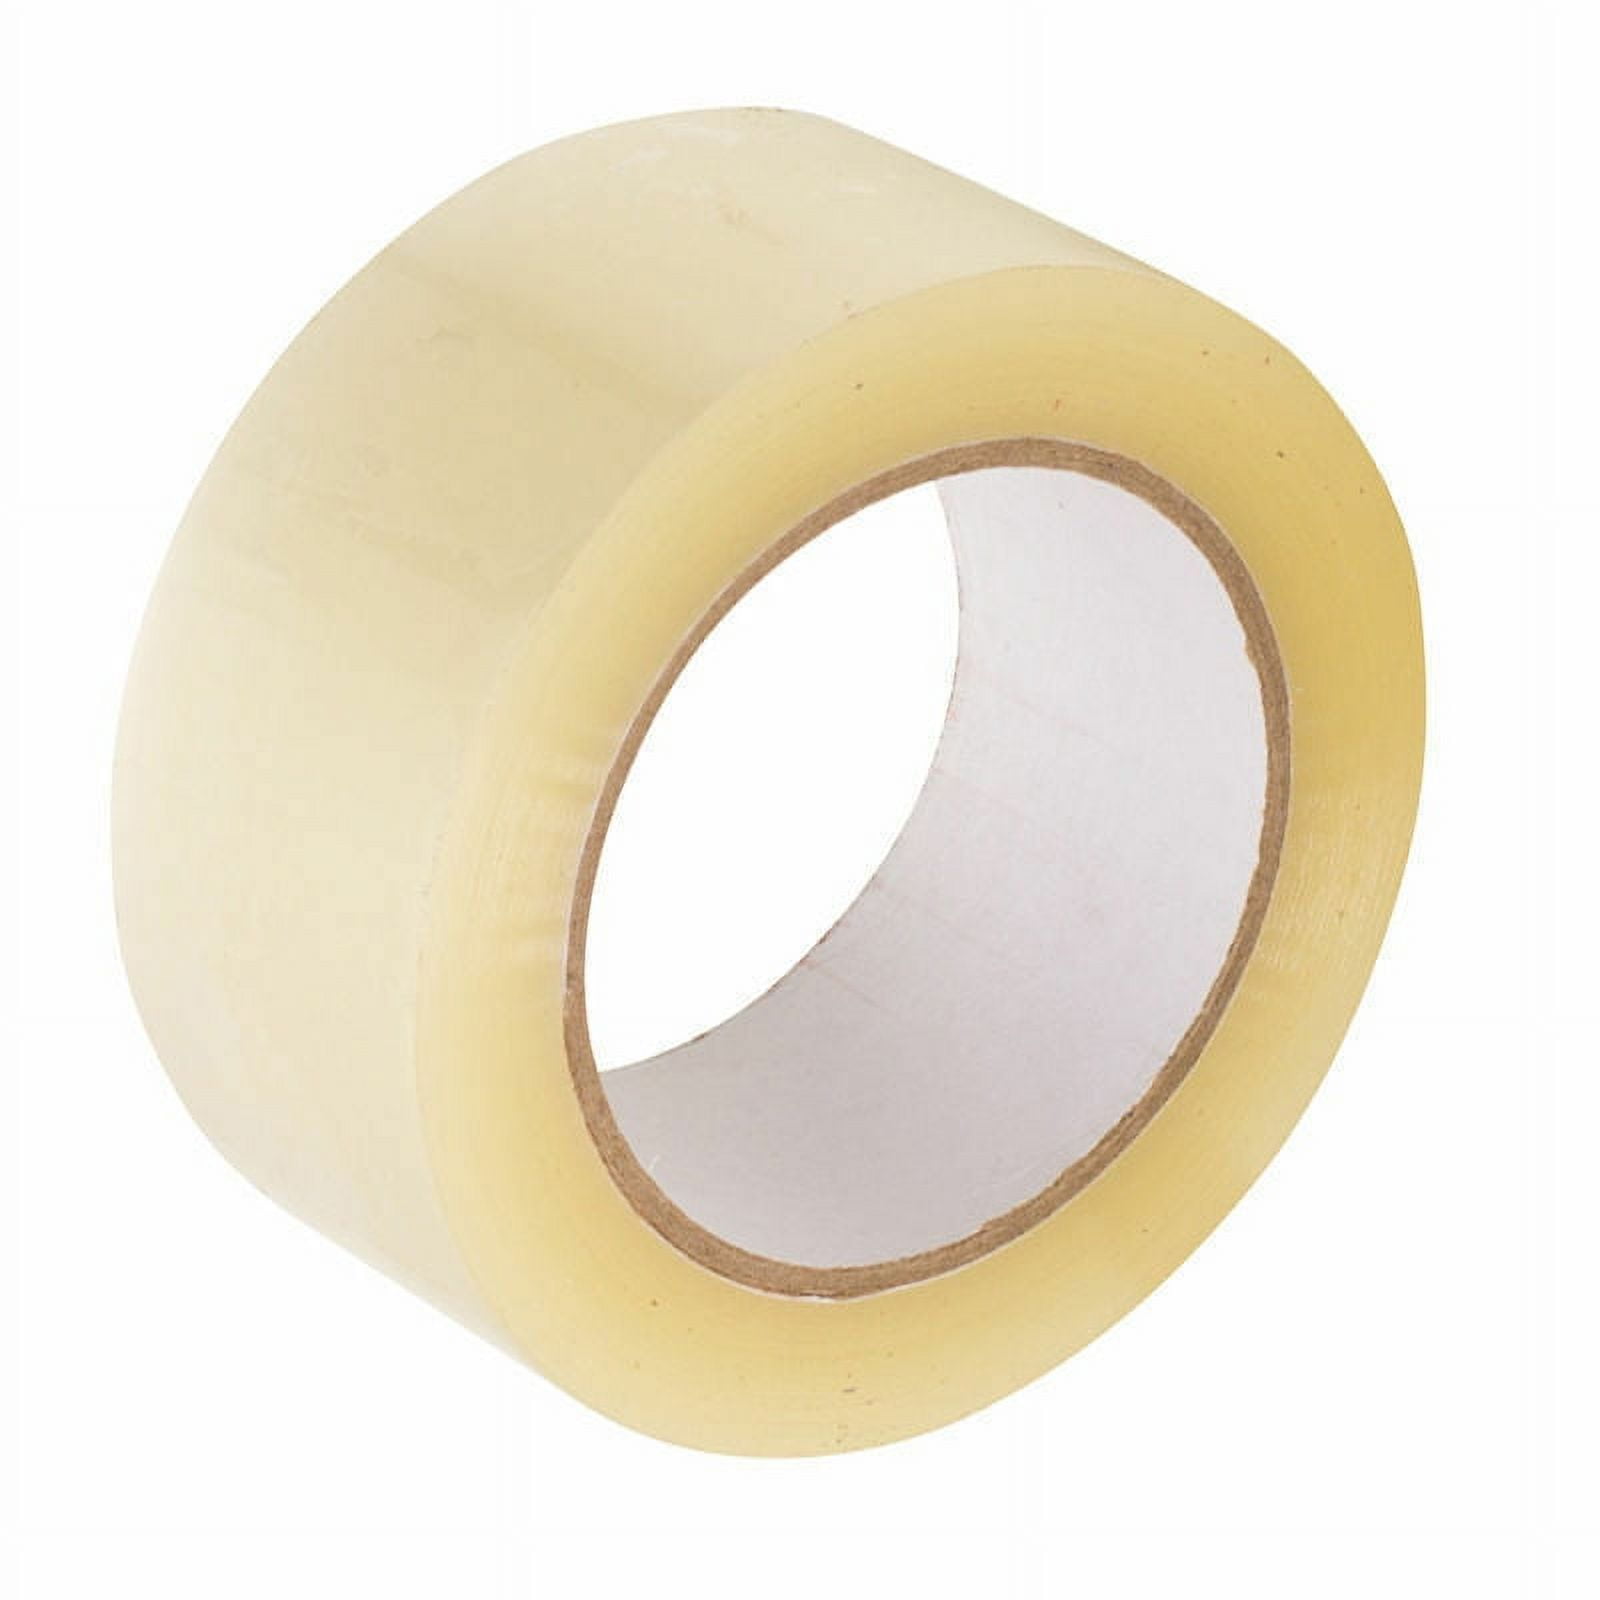 My Go 2 Packing Tape, 72 Pack, 110 Yard, 2.3 mil, Standard Width, Ultra Clear